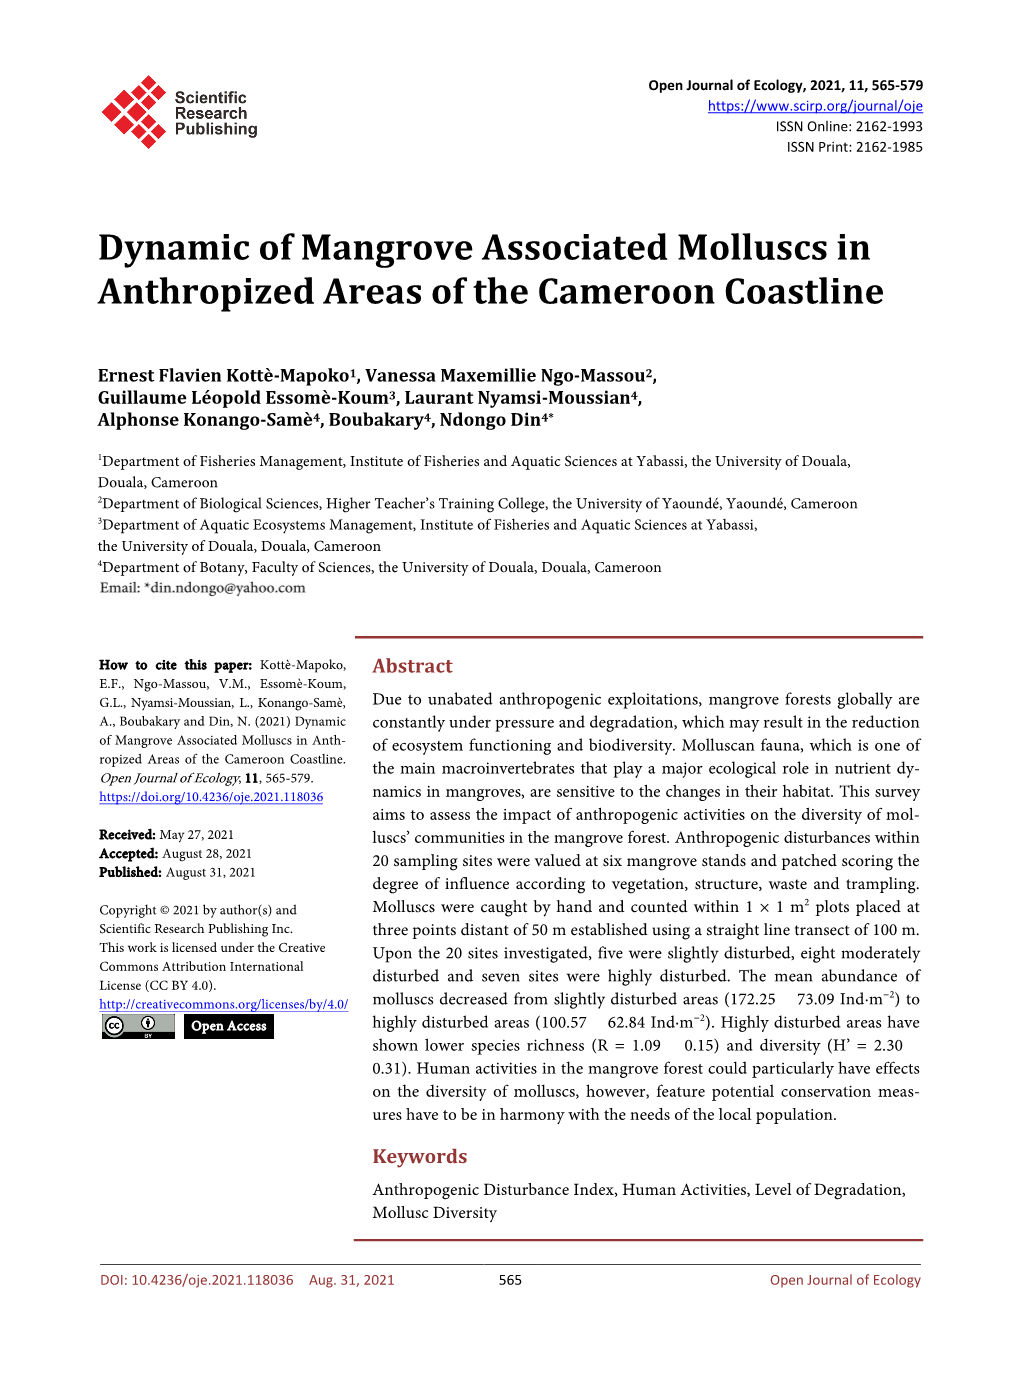 Dynamic of Mangrove Associated Molluscs in Anthropized Areas of the Cameroon Coastline